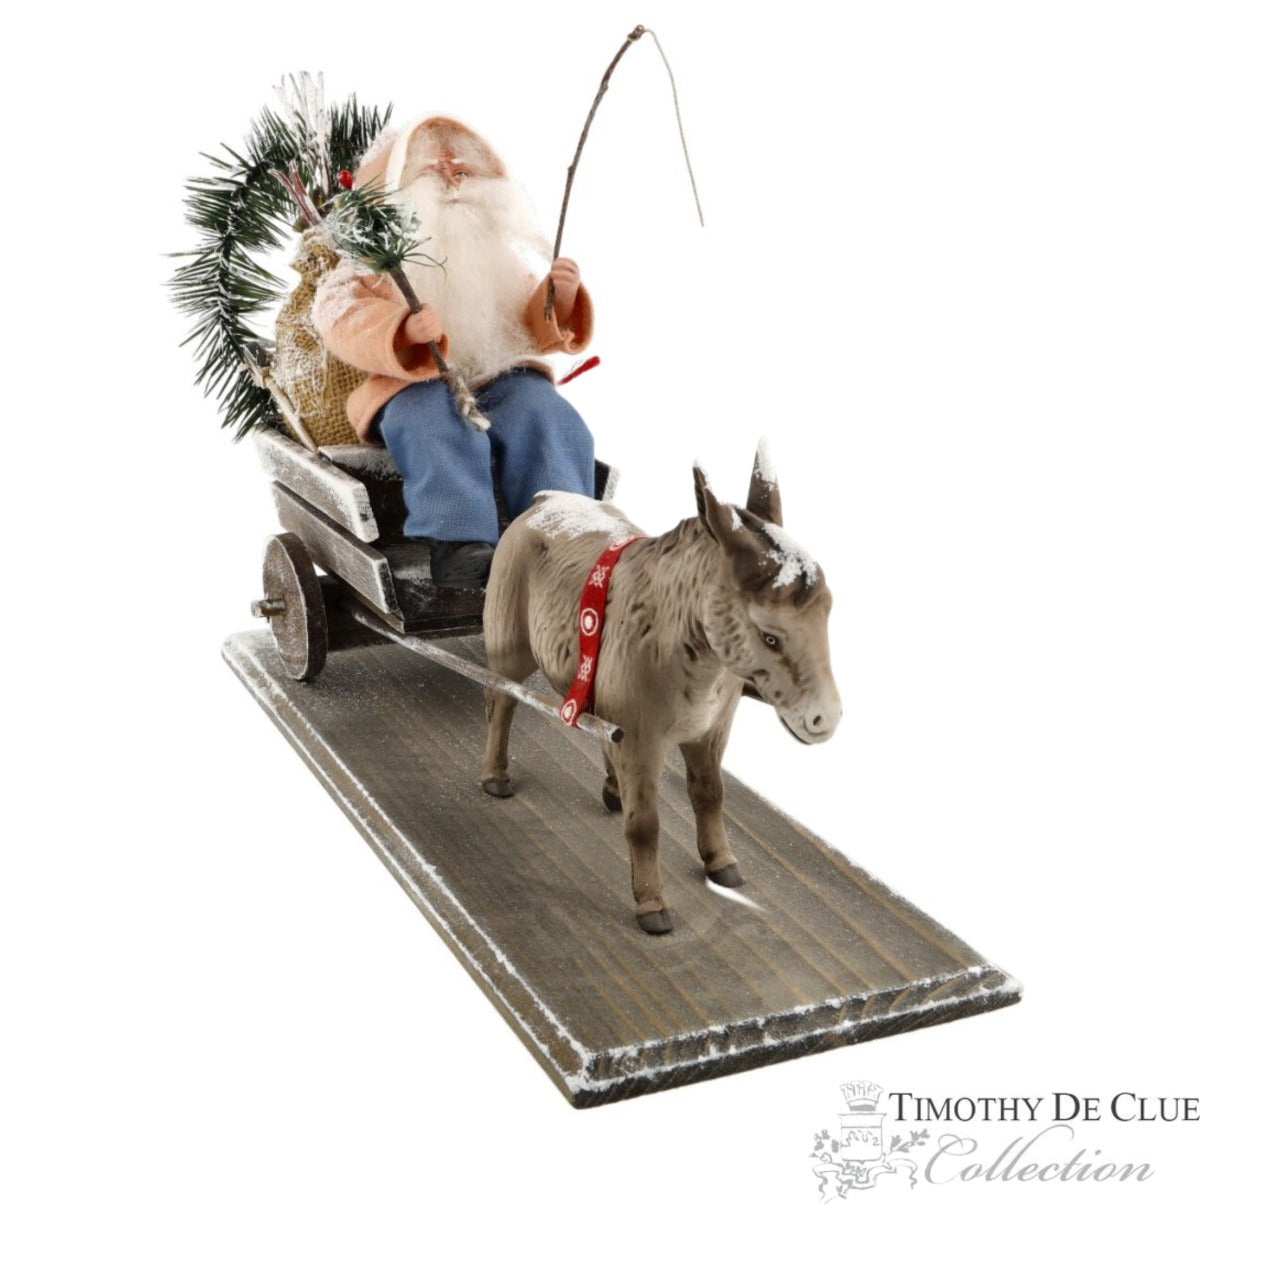 To The Market Donkey Drawn Cart Santa Paper Mache | Vintage German Reproduction of 19th Century Piece Timothy De Clue Christmas Collection